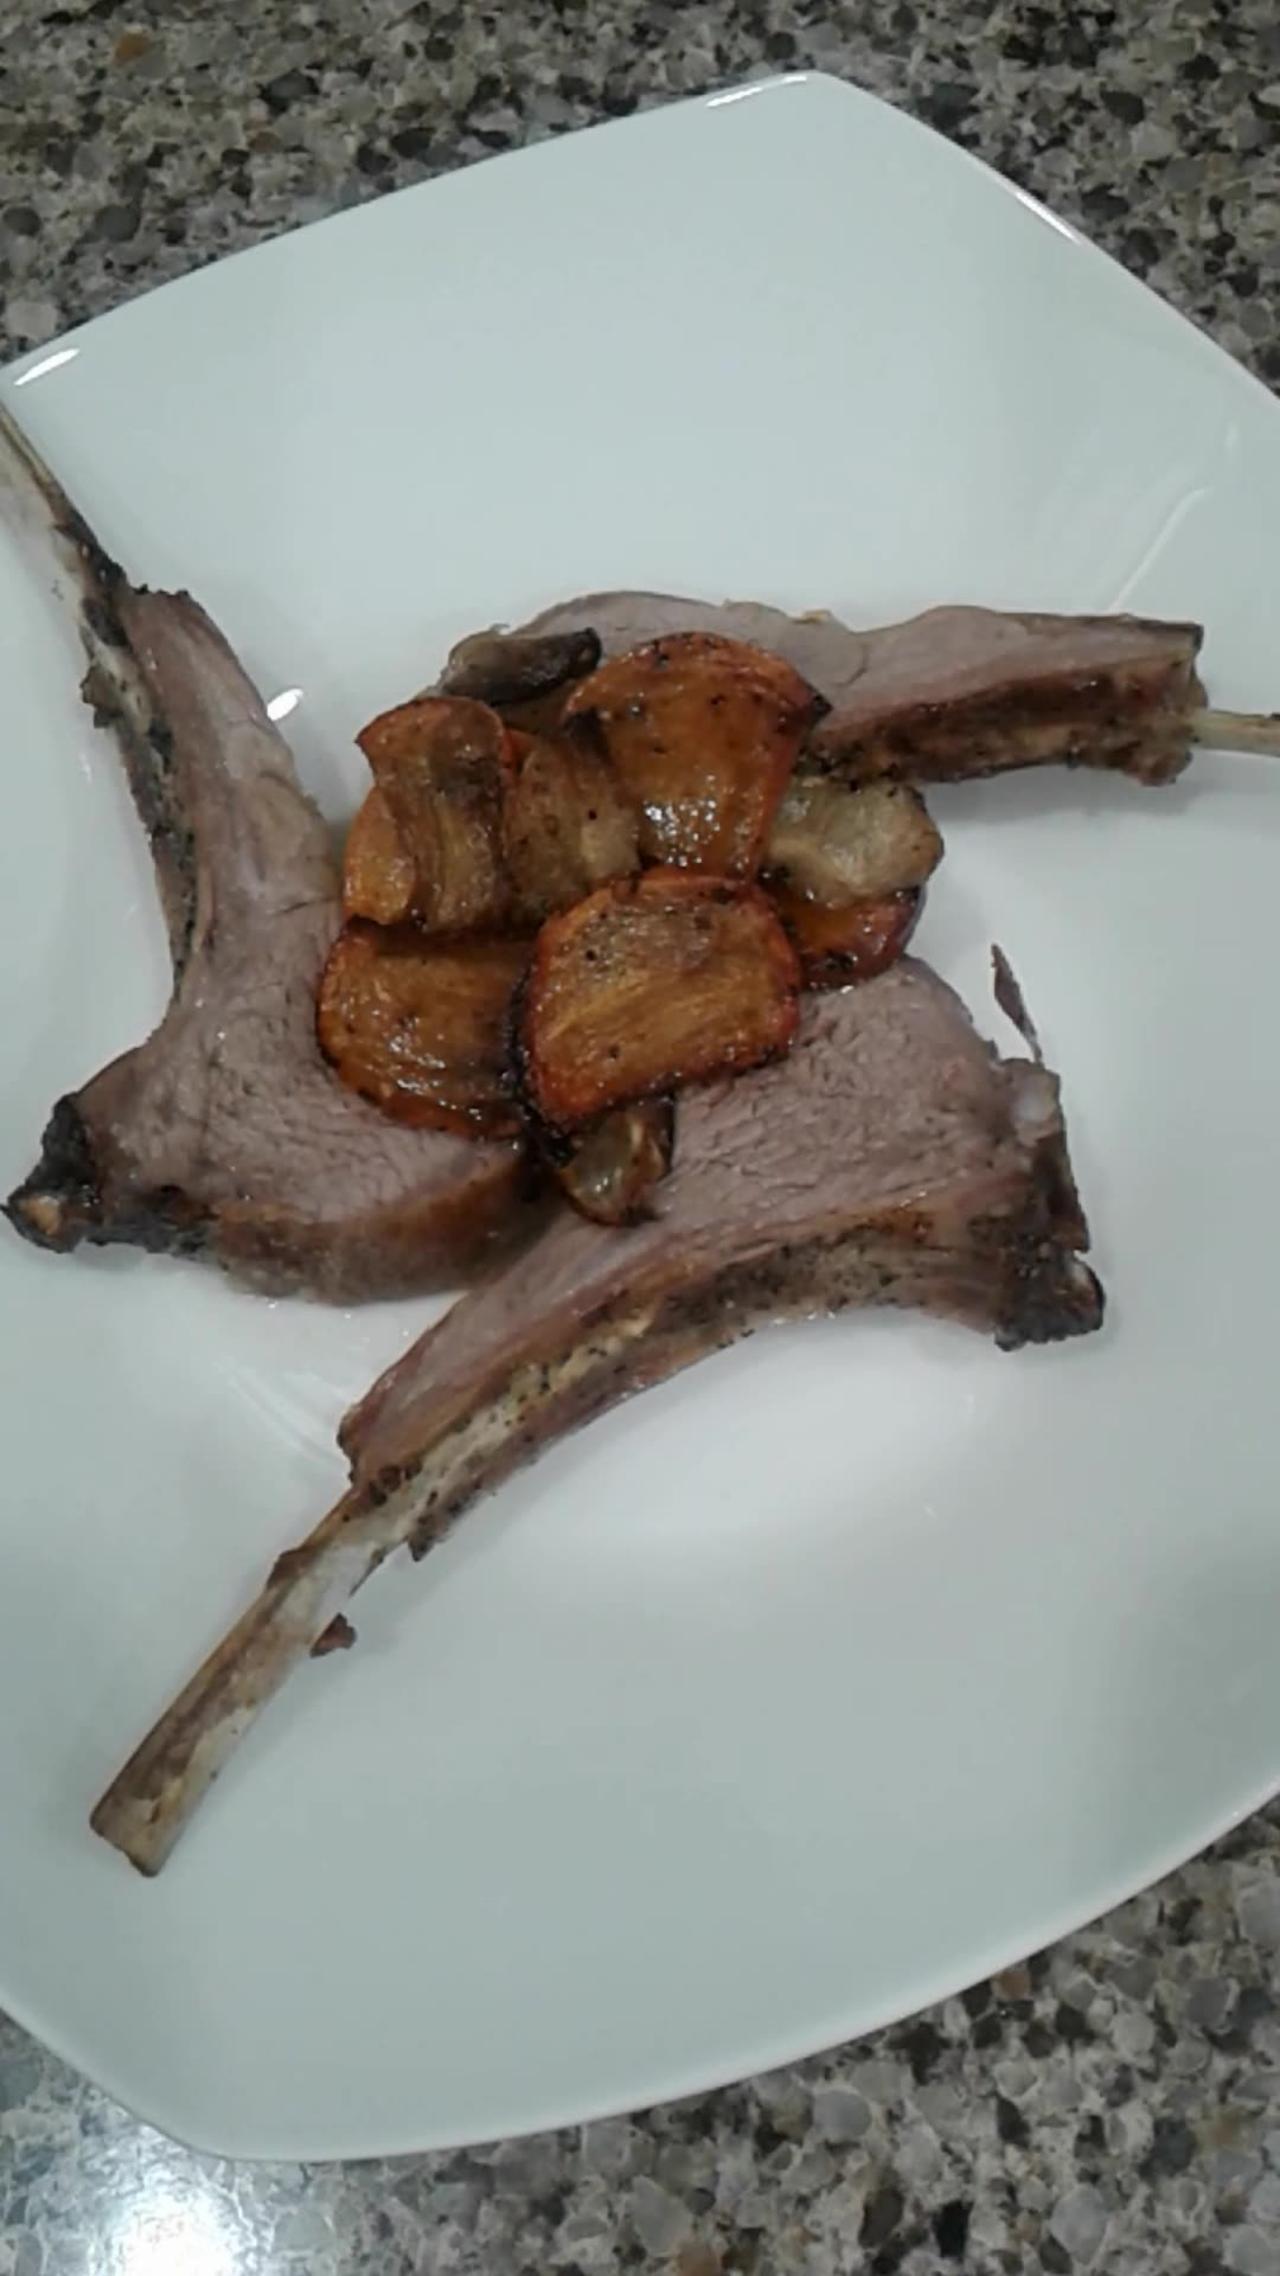 FoodPerfect: Legendary Lamb With Apple And Persimmon: Score: 5/5 (With How To)